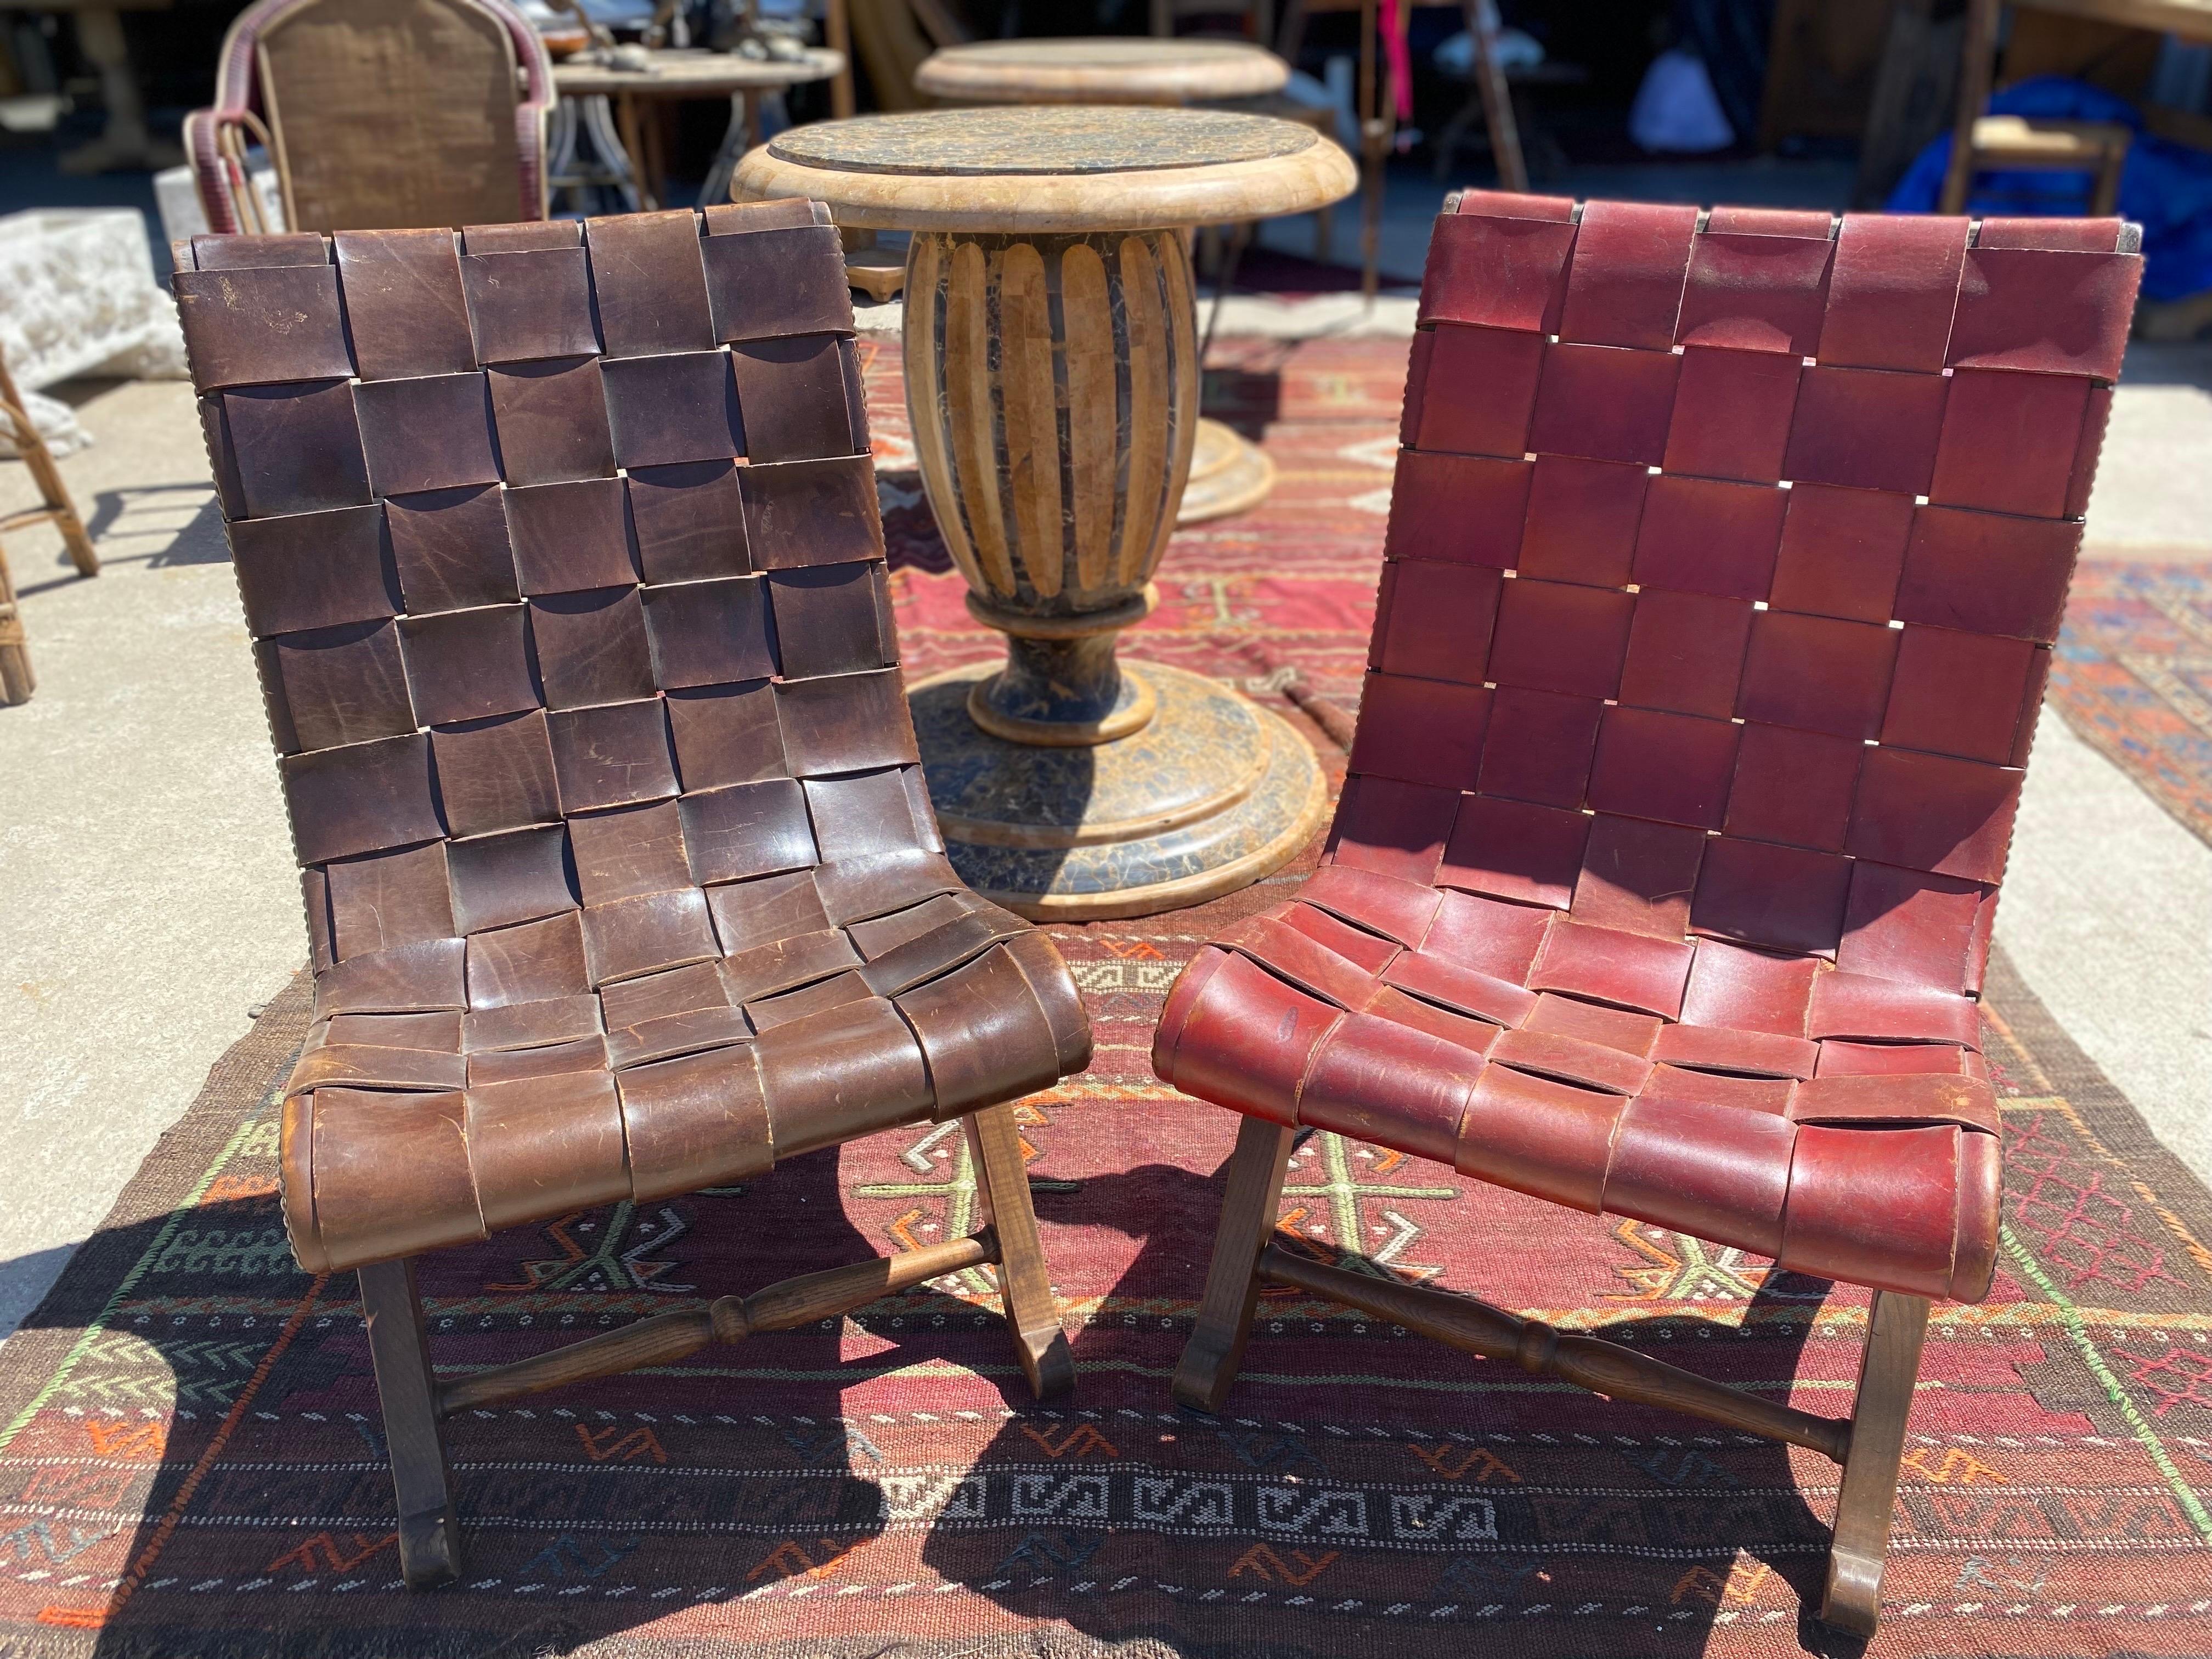 Pair of mid-century, neoclassical thick leather PIerre Lottier slipper chairs, circa 1950s, Spain. One chair features a rich brown color and the other is a burgundy color, both have beautiful naturally aged patina. Upholstered in their original